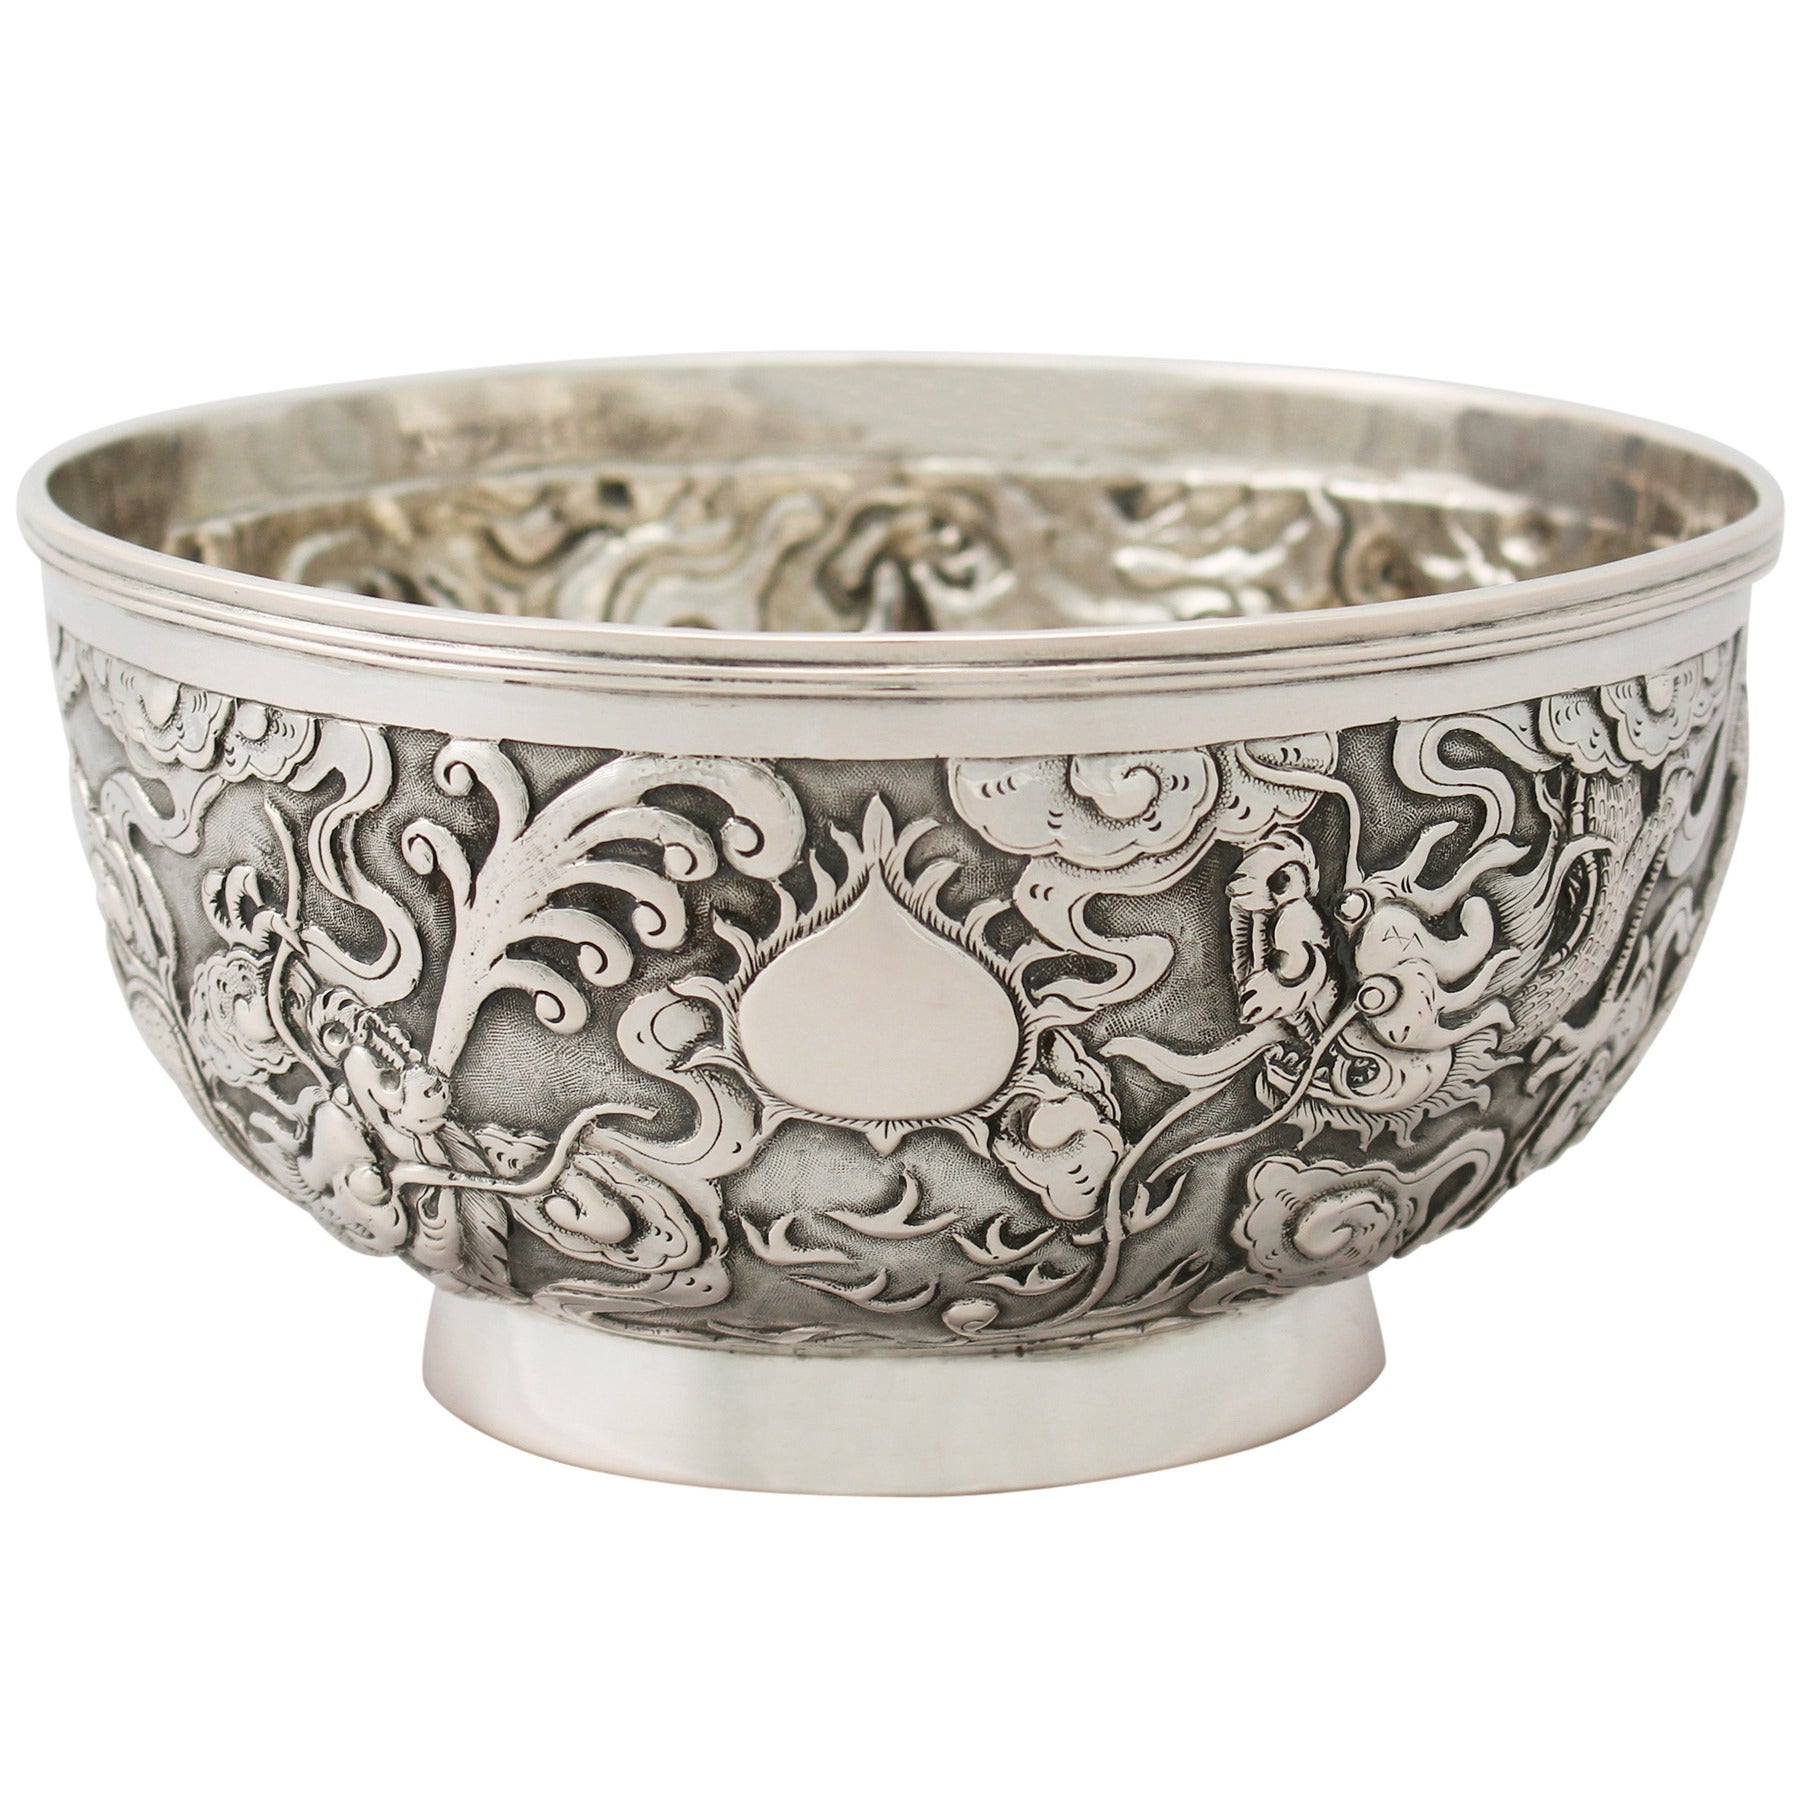 Chinese Export Silver Bowl - Antique Circa 1890